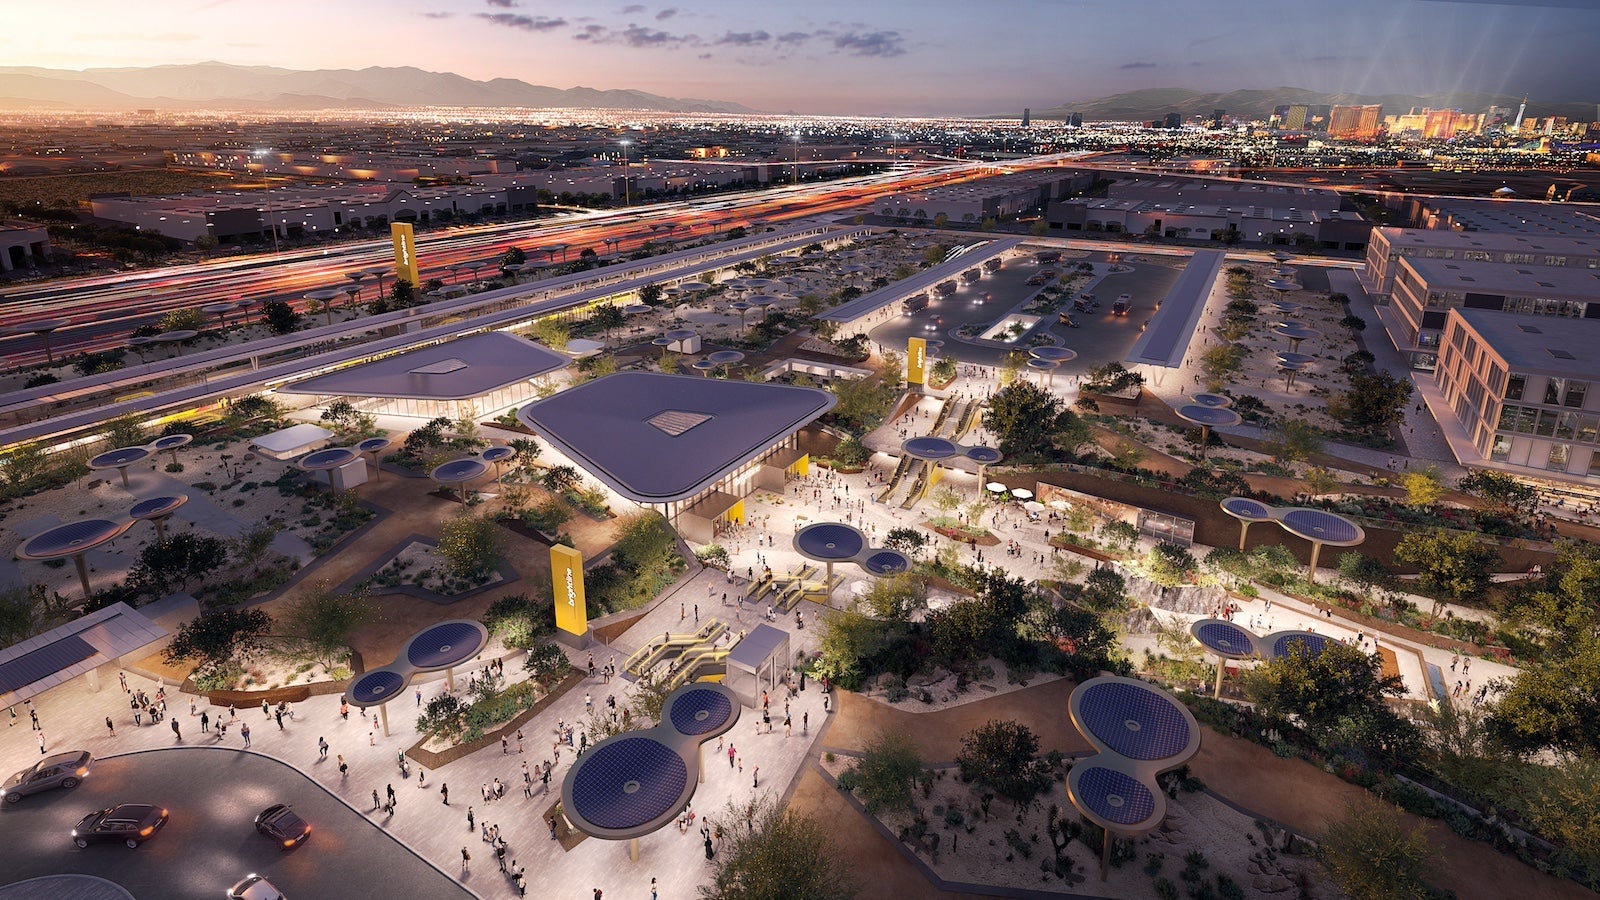 Las Vegas' flagship Brightline West high-speed rail project launches